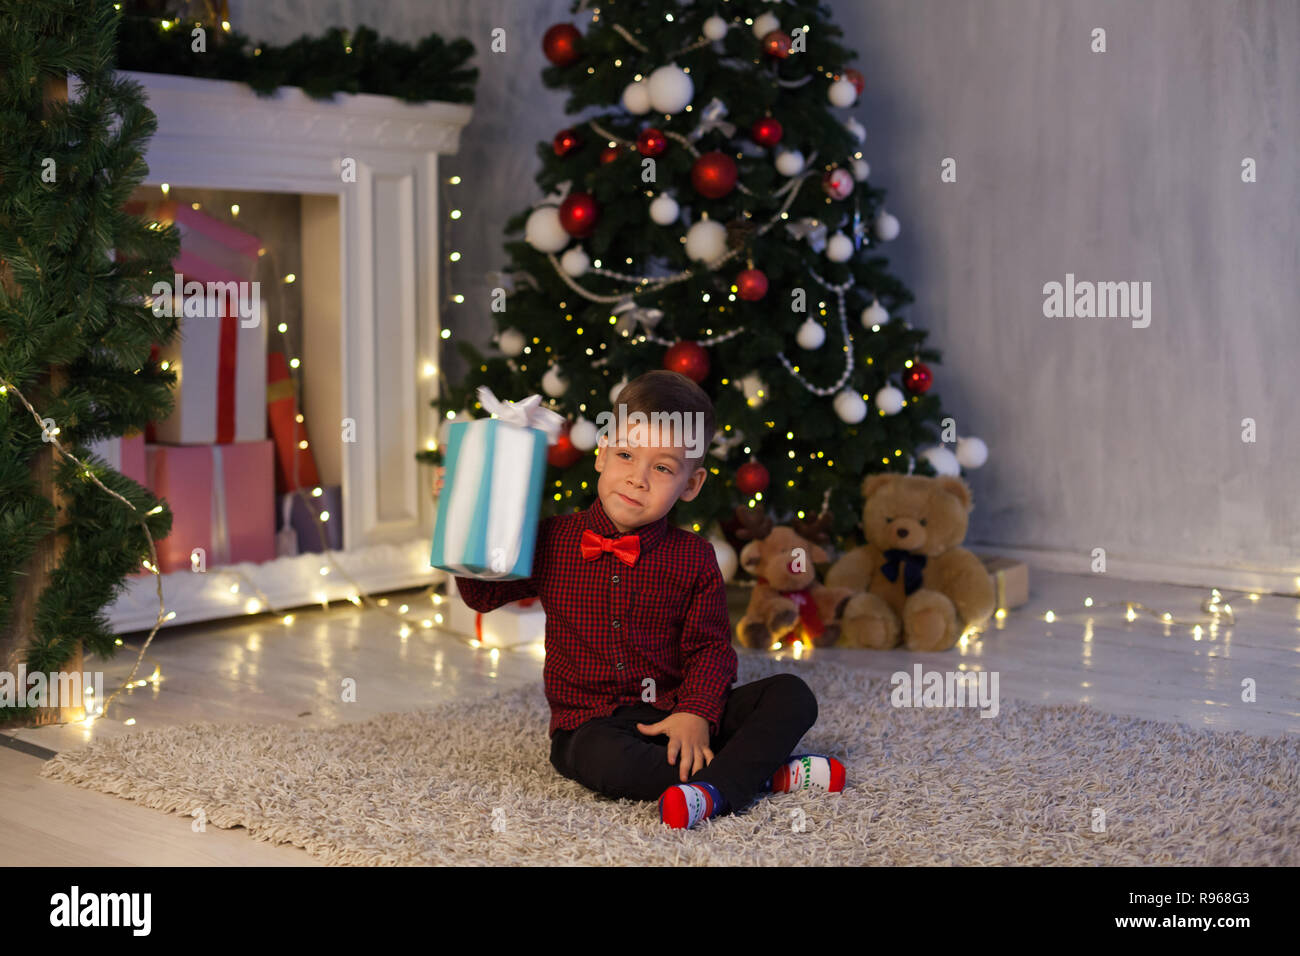 boy open up gifts from Christmas New Year holiday house Stock Photo